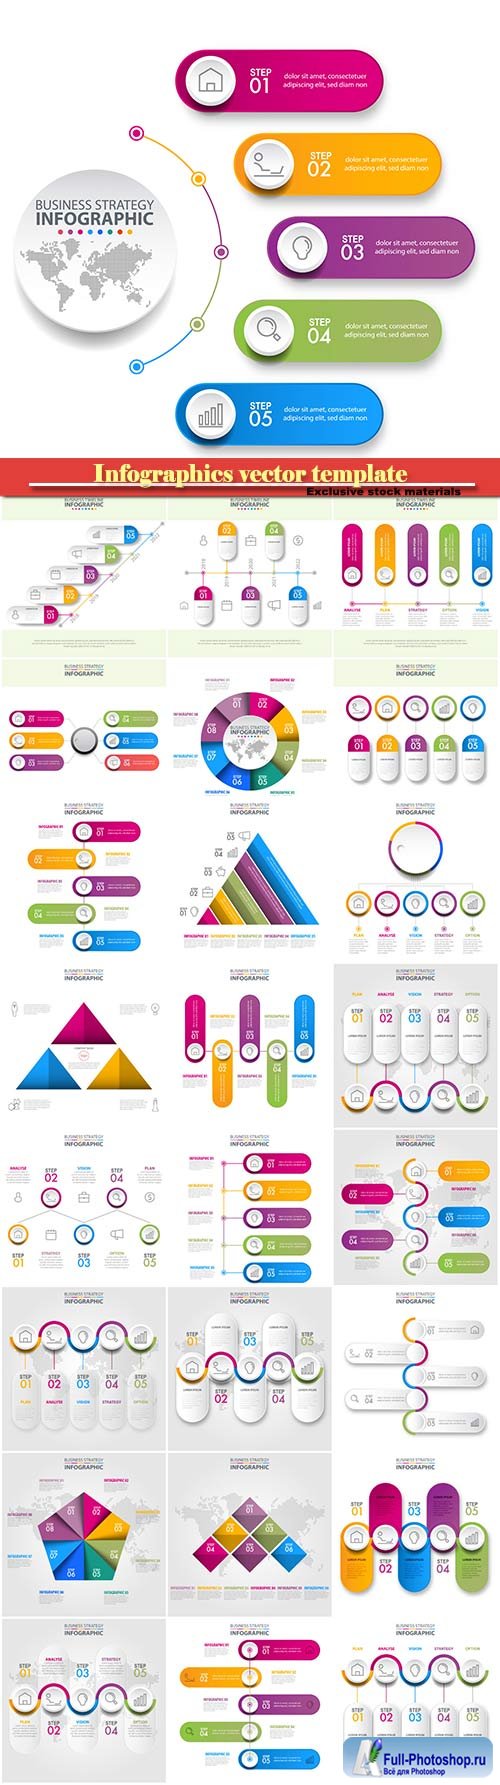 Infographics vector template for business presentations or information banner # 11